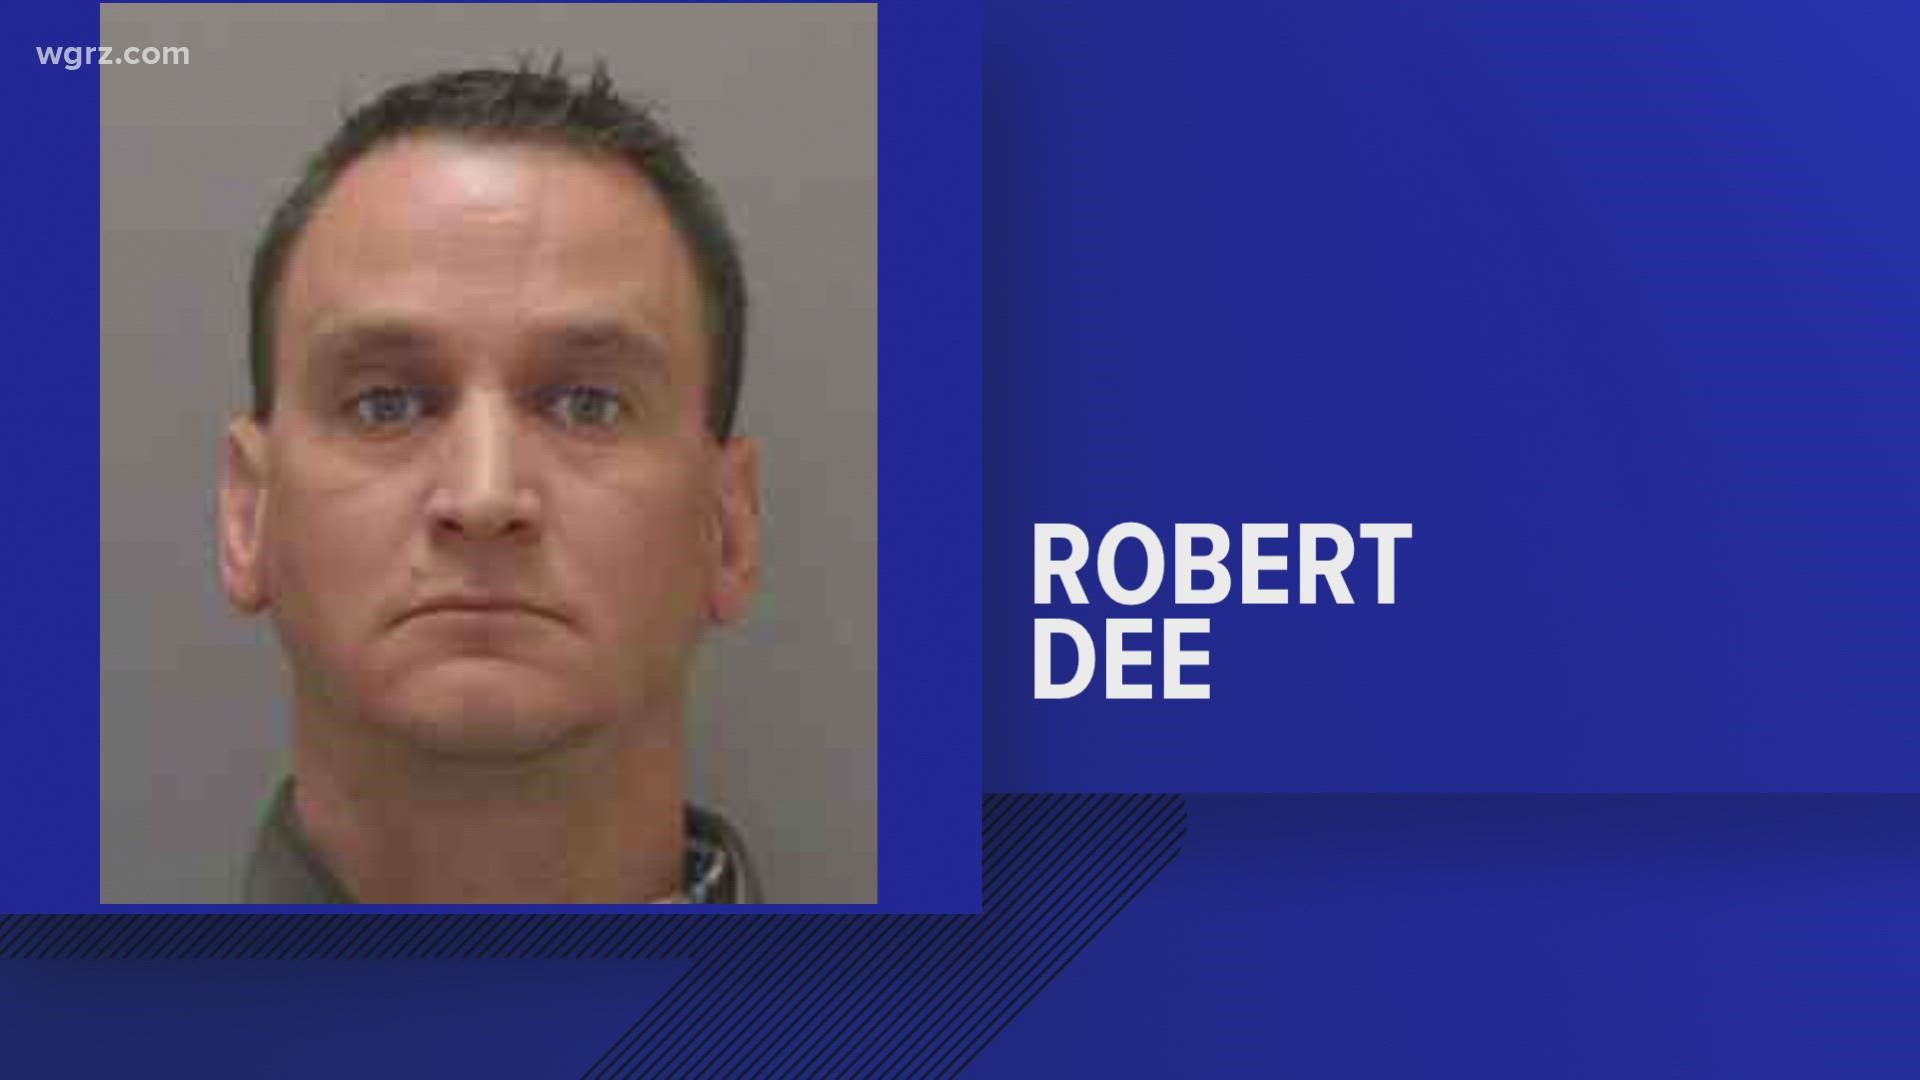 41-year-old Robert Dee of Eden had been on unpaid leave since that indictment. And he also faces domestic violence-related charges from alleged off-duty incidents as